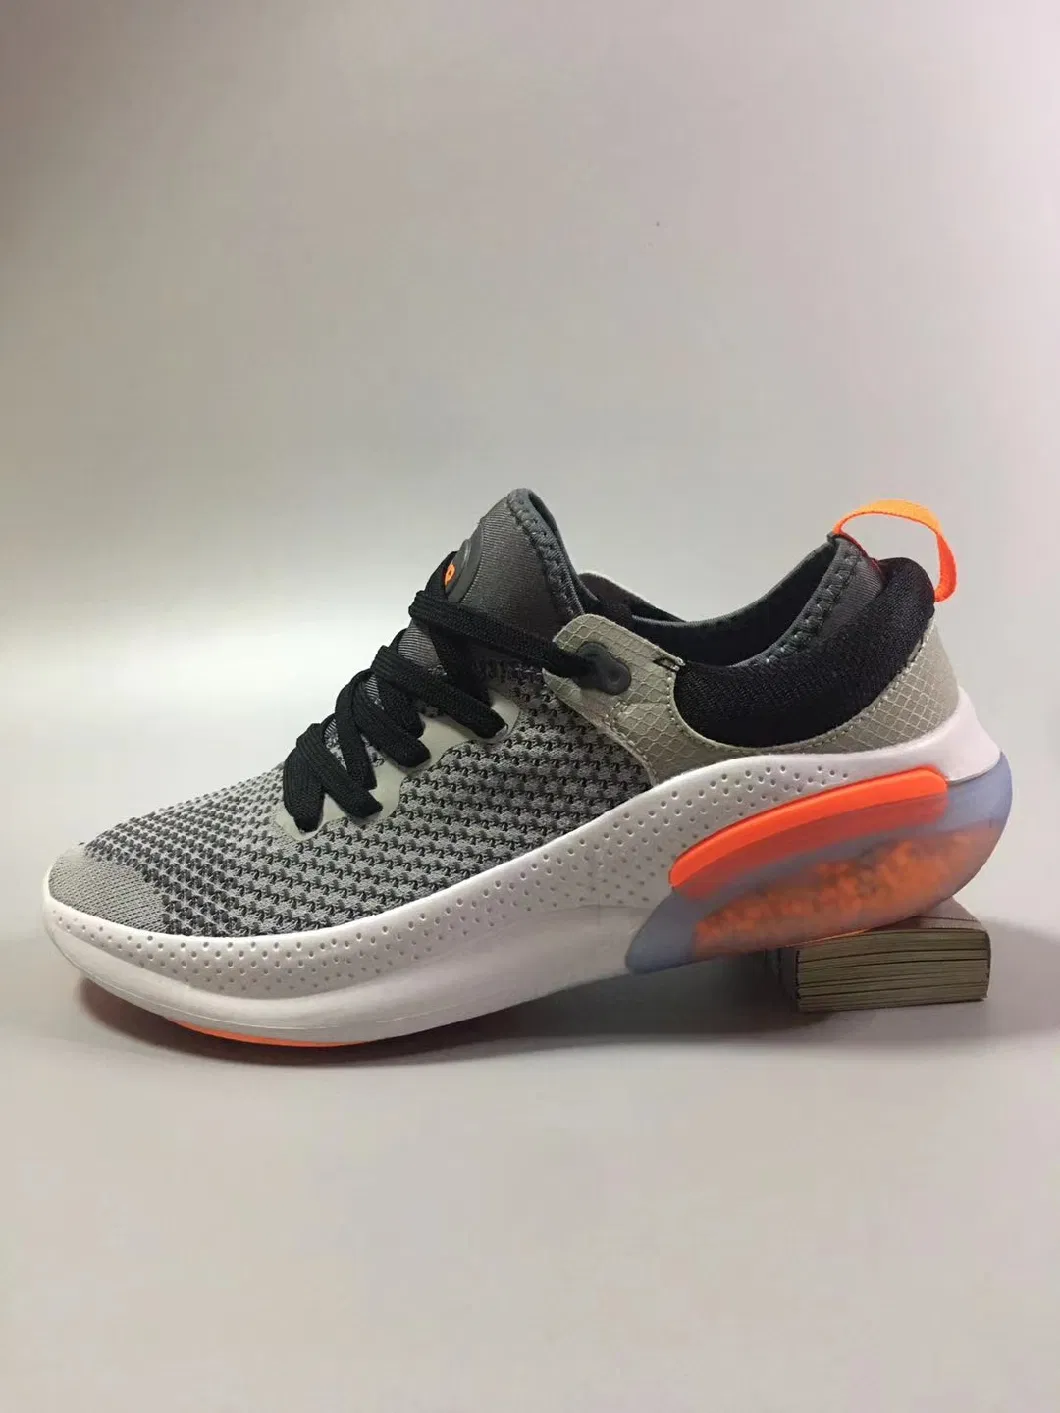 2023 Brand Men Running Casual Shoes Popular Leisure Shoes, Comfortable Athletic Women Sneaker Shoes, Low MOQ Stock Footwear New Style Fashion Sport Shoes